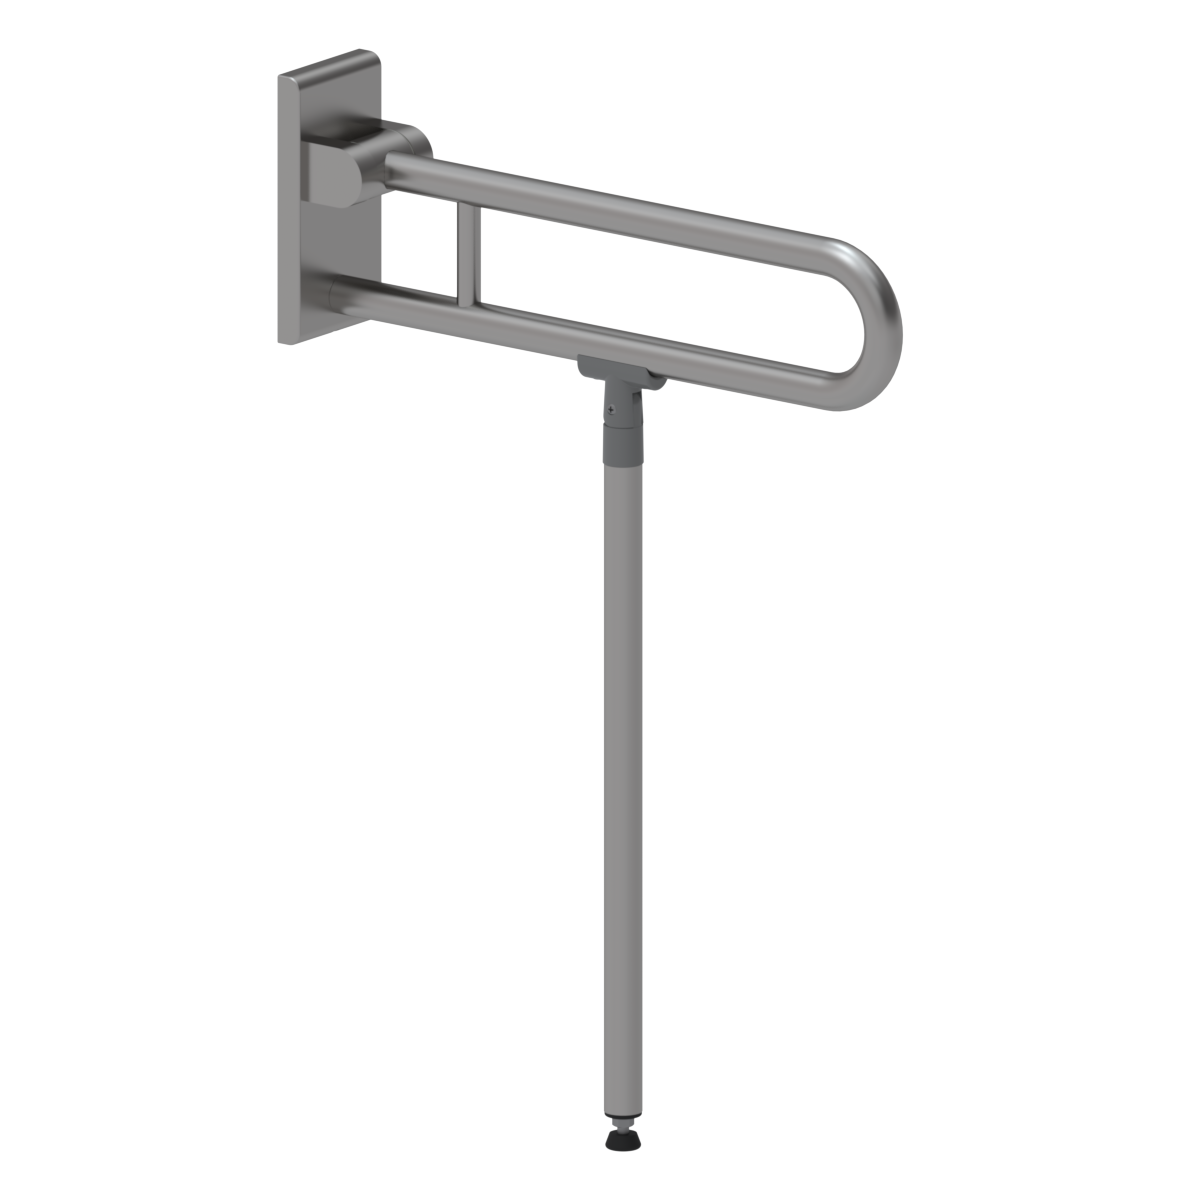 Inox Care Lift-up support rail vario, with base plate, with floor support (800 mm), left and right, L = 600 mm, Stainless steel